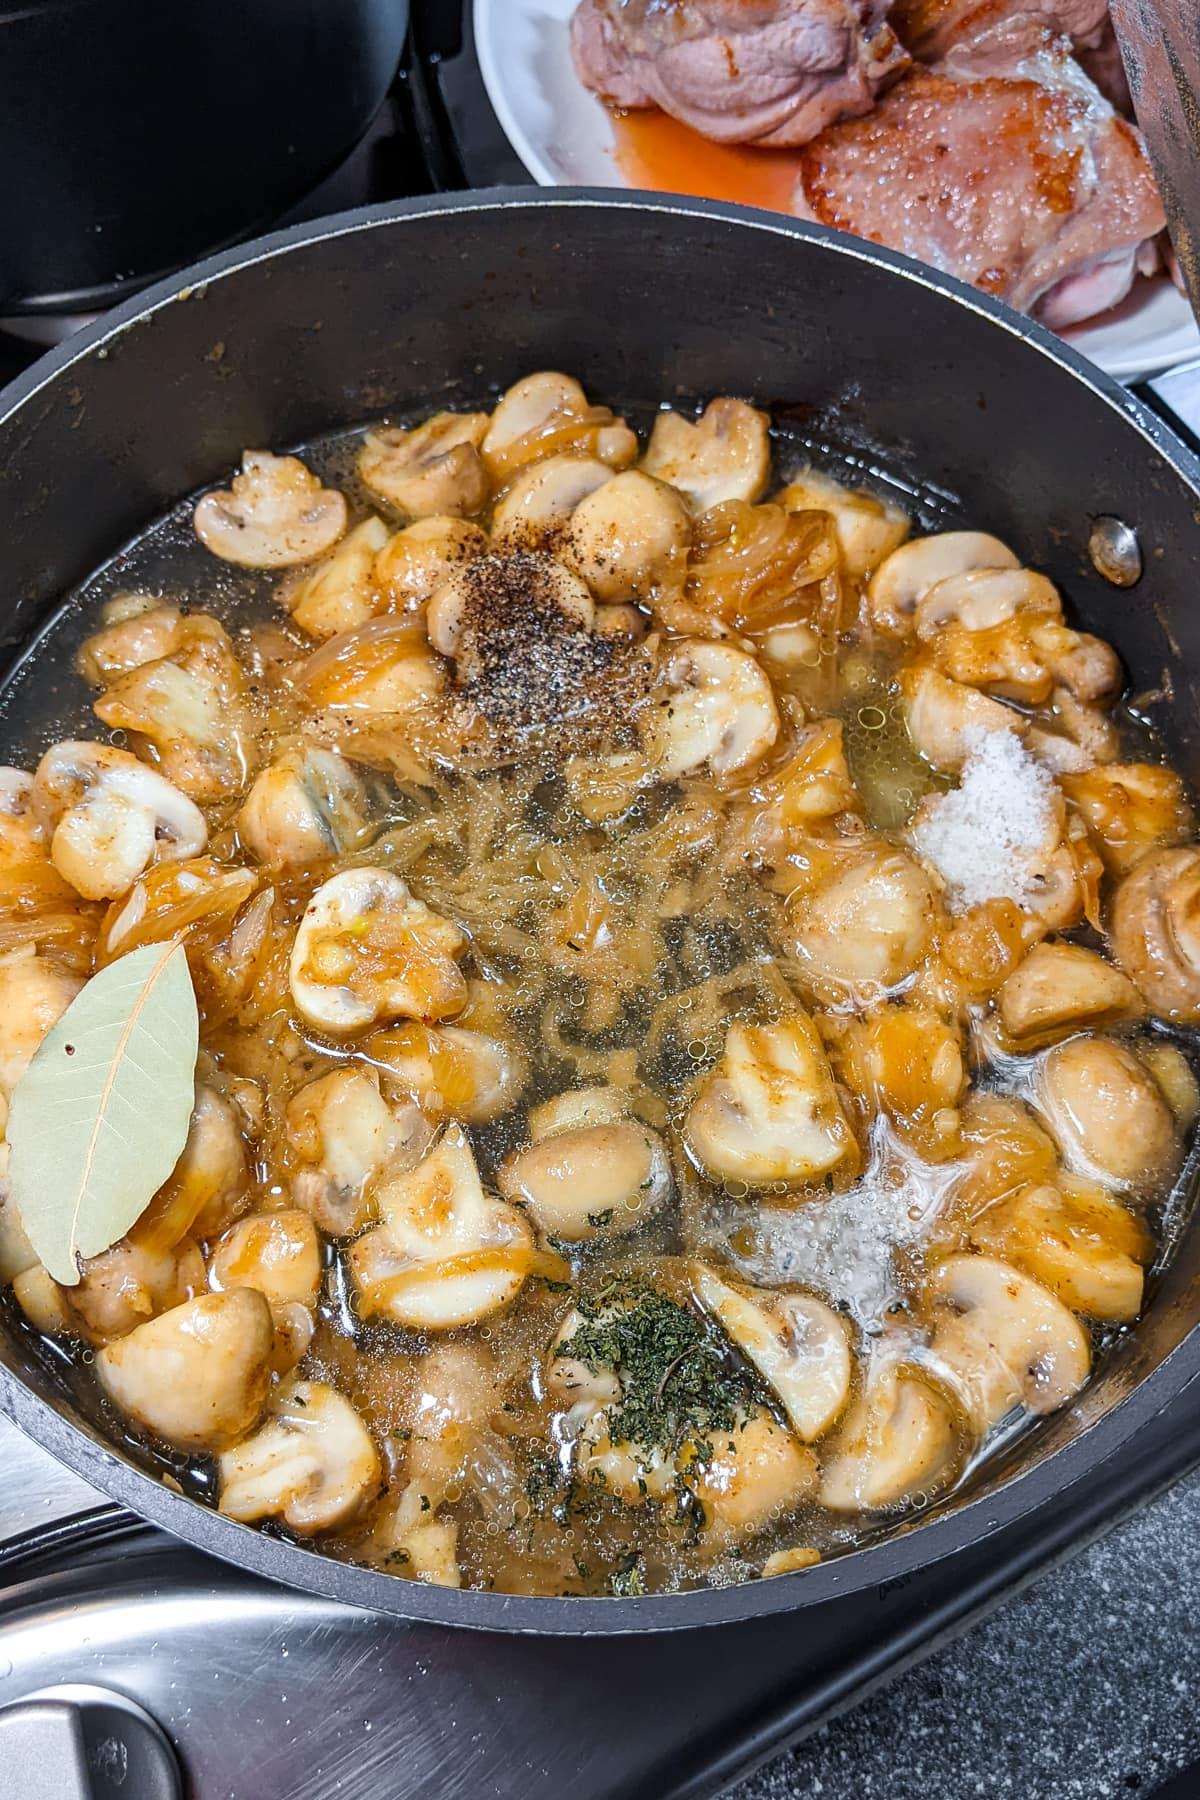 Adding spices and bay leaf over the fried mushrooms and fried onions.